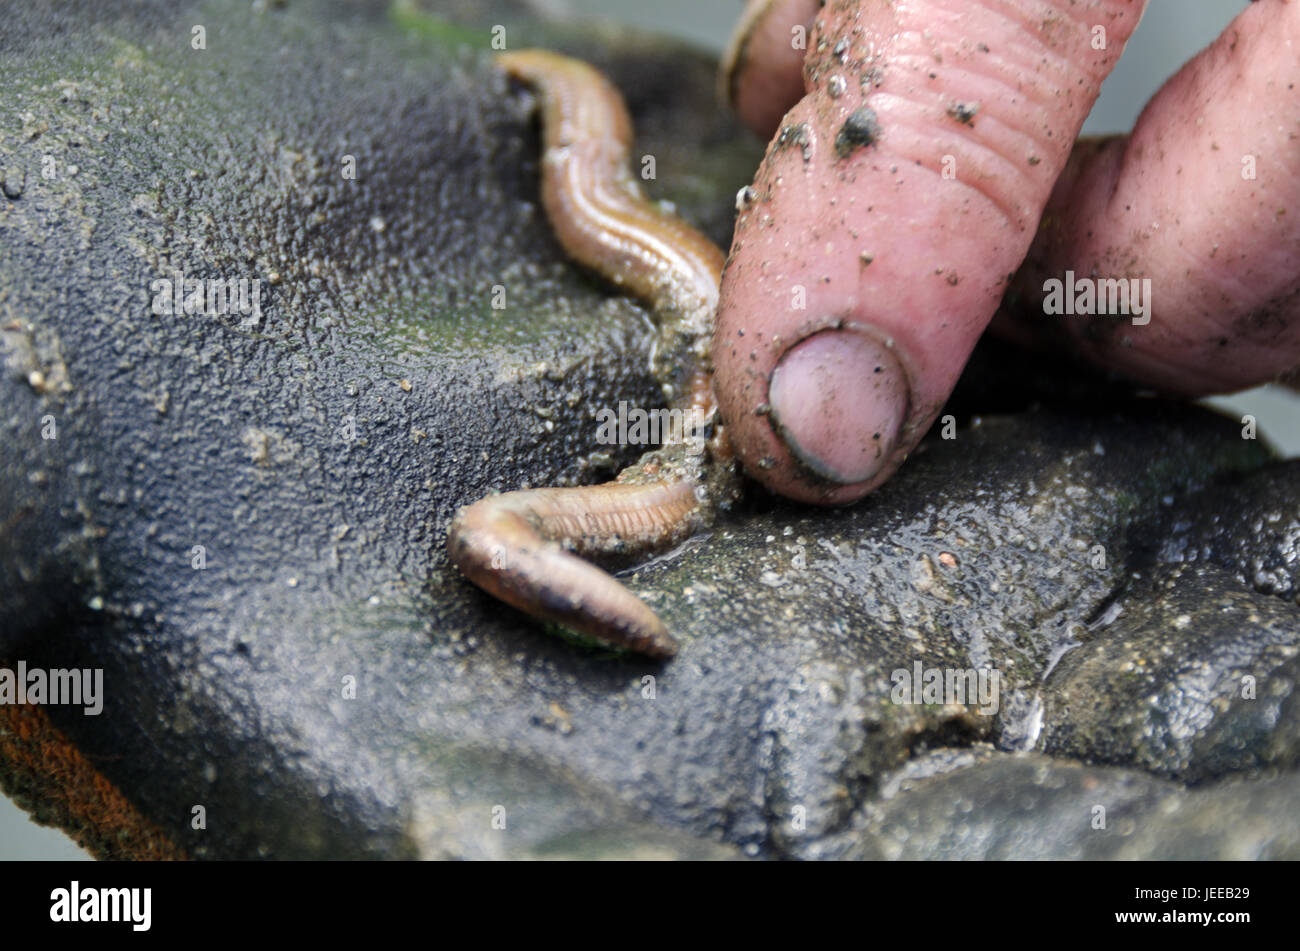 A commercial wormer holds an unidentified marine worm in his gloved hand, Acadia National Park, Schoodic Penninsula, Maine, USA. Stock Photo